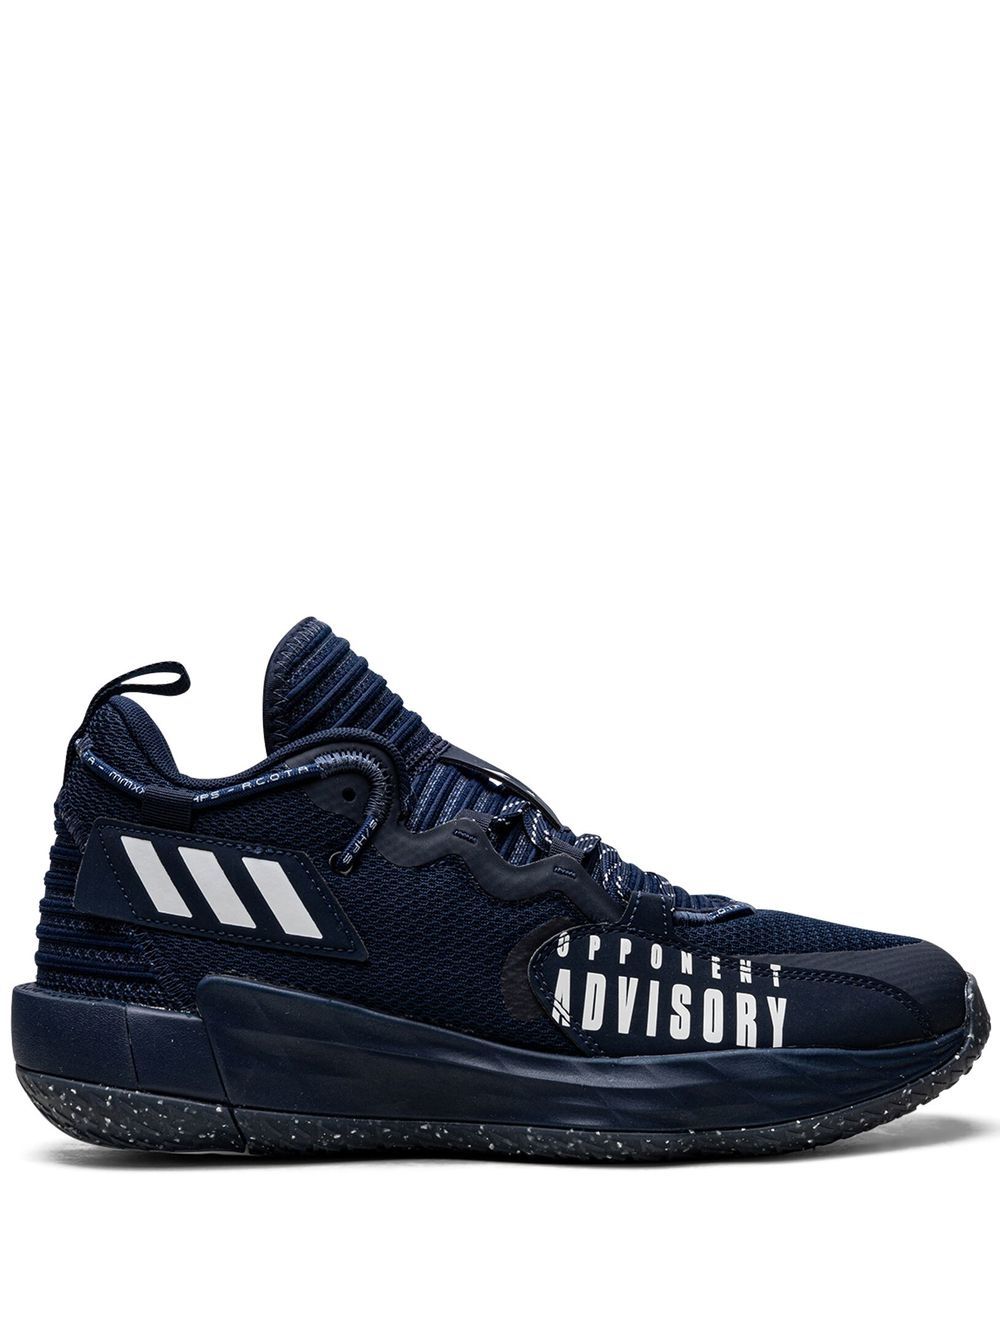 Adidas Originals Dame 7 Extply Low-top Trainers In Blue